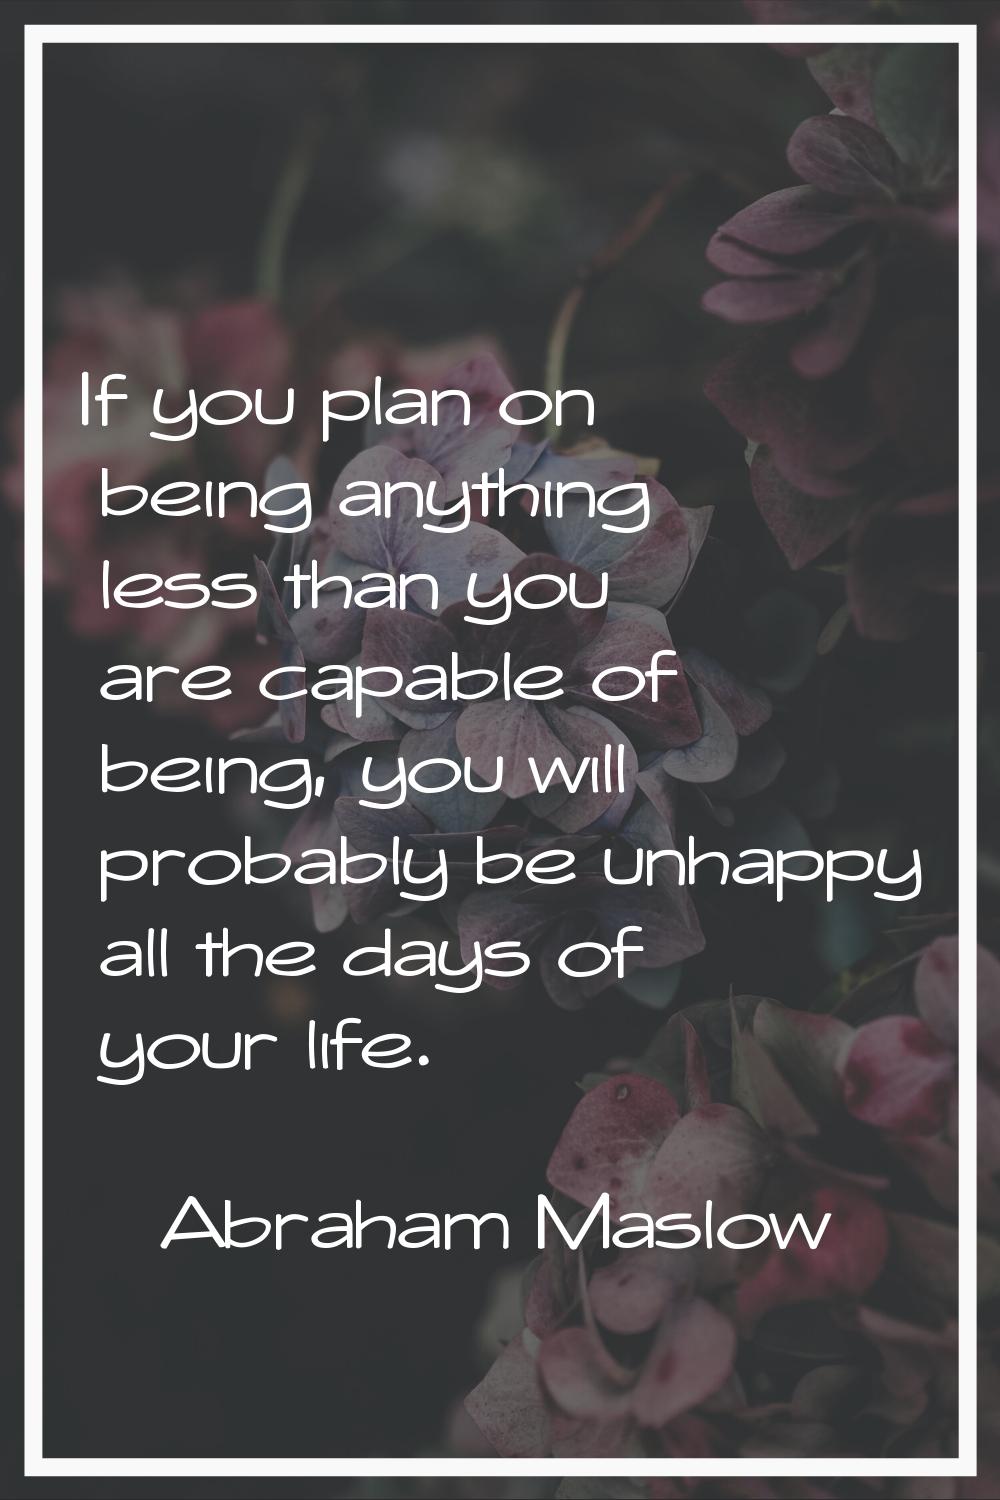 If you plan on being anything less than you are capable of being, you will probably be unhappy all 